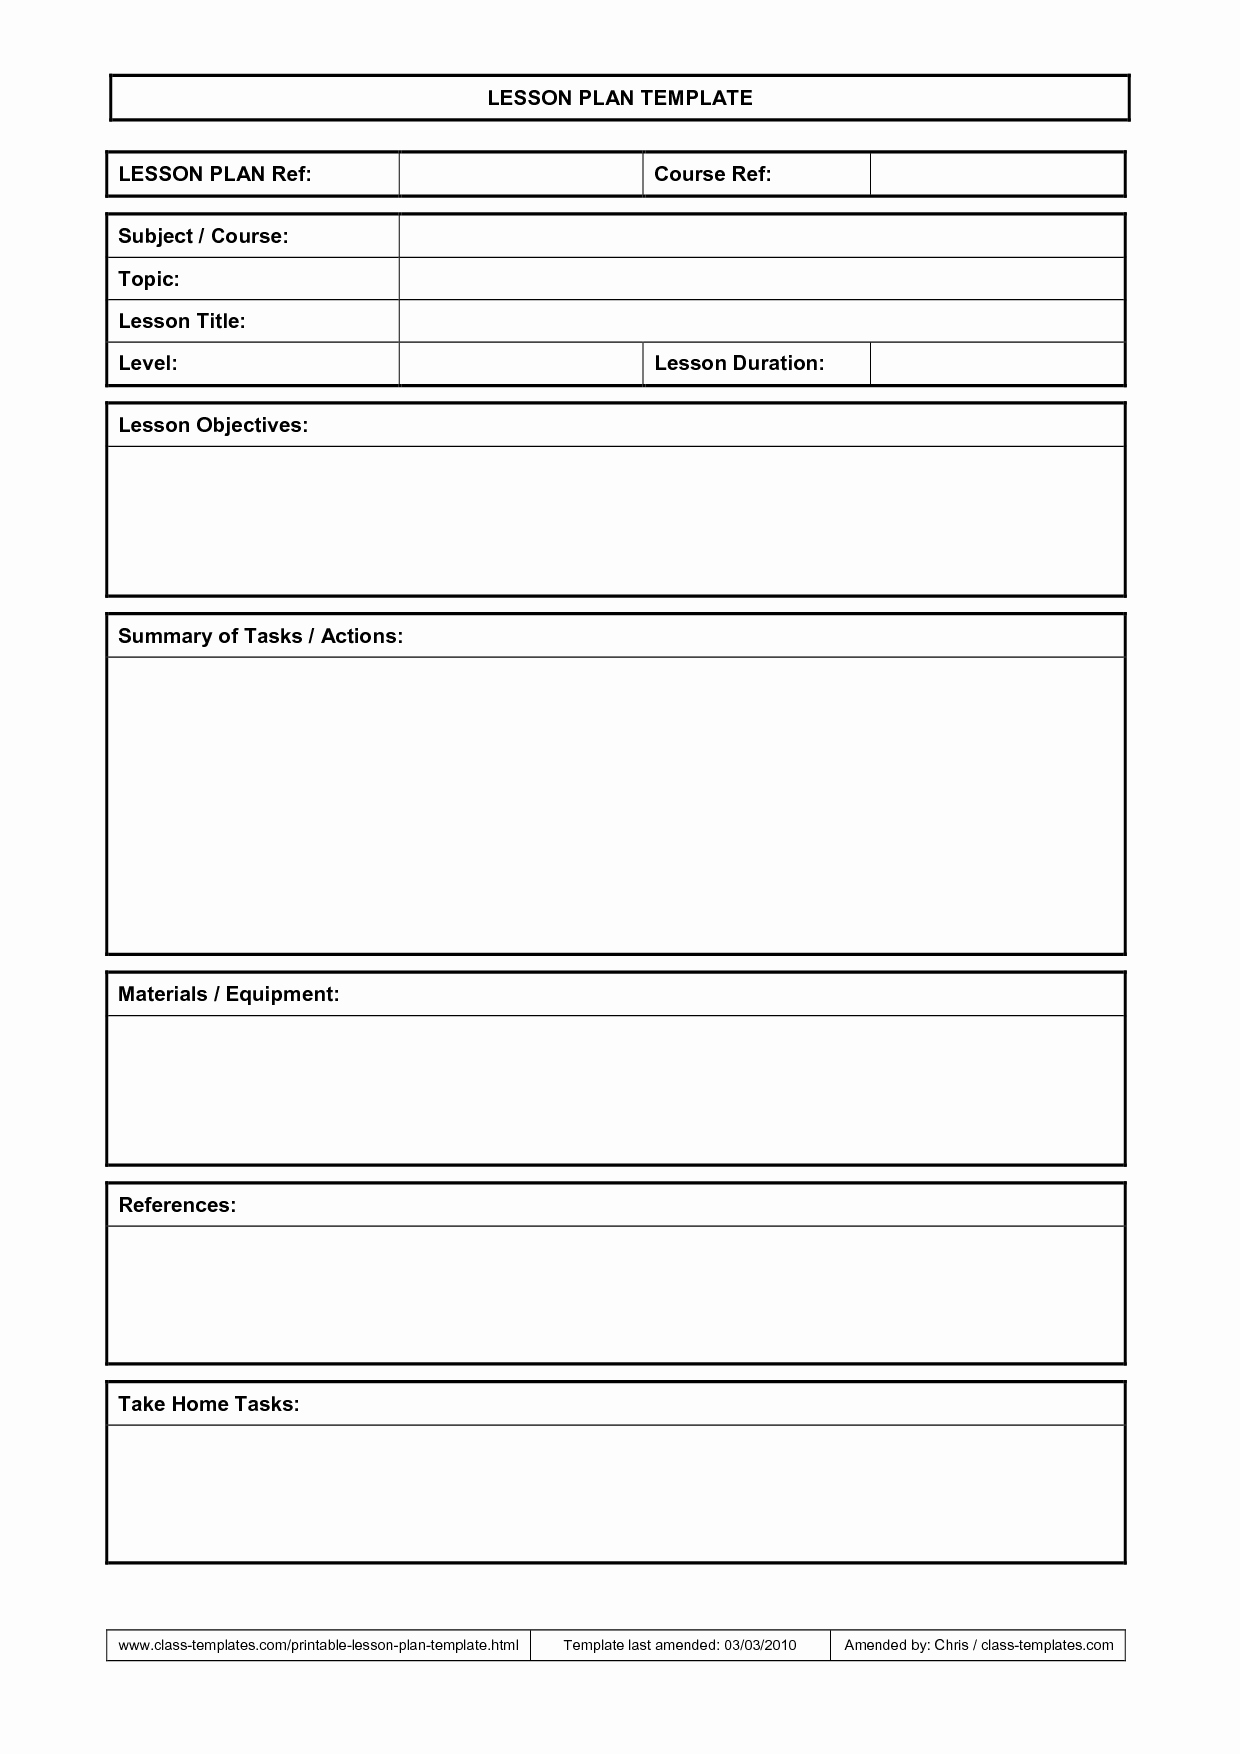 Blank Lesson Plan Template Free New Lesson Plan Template …